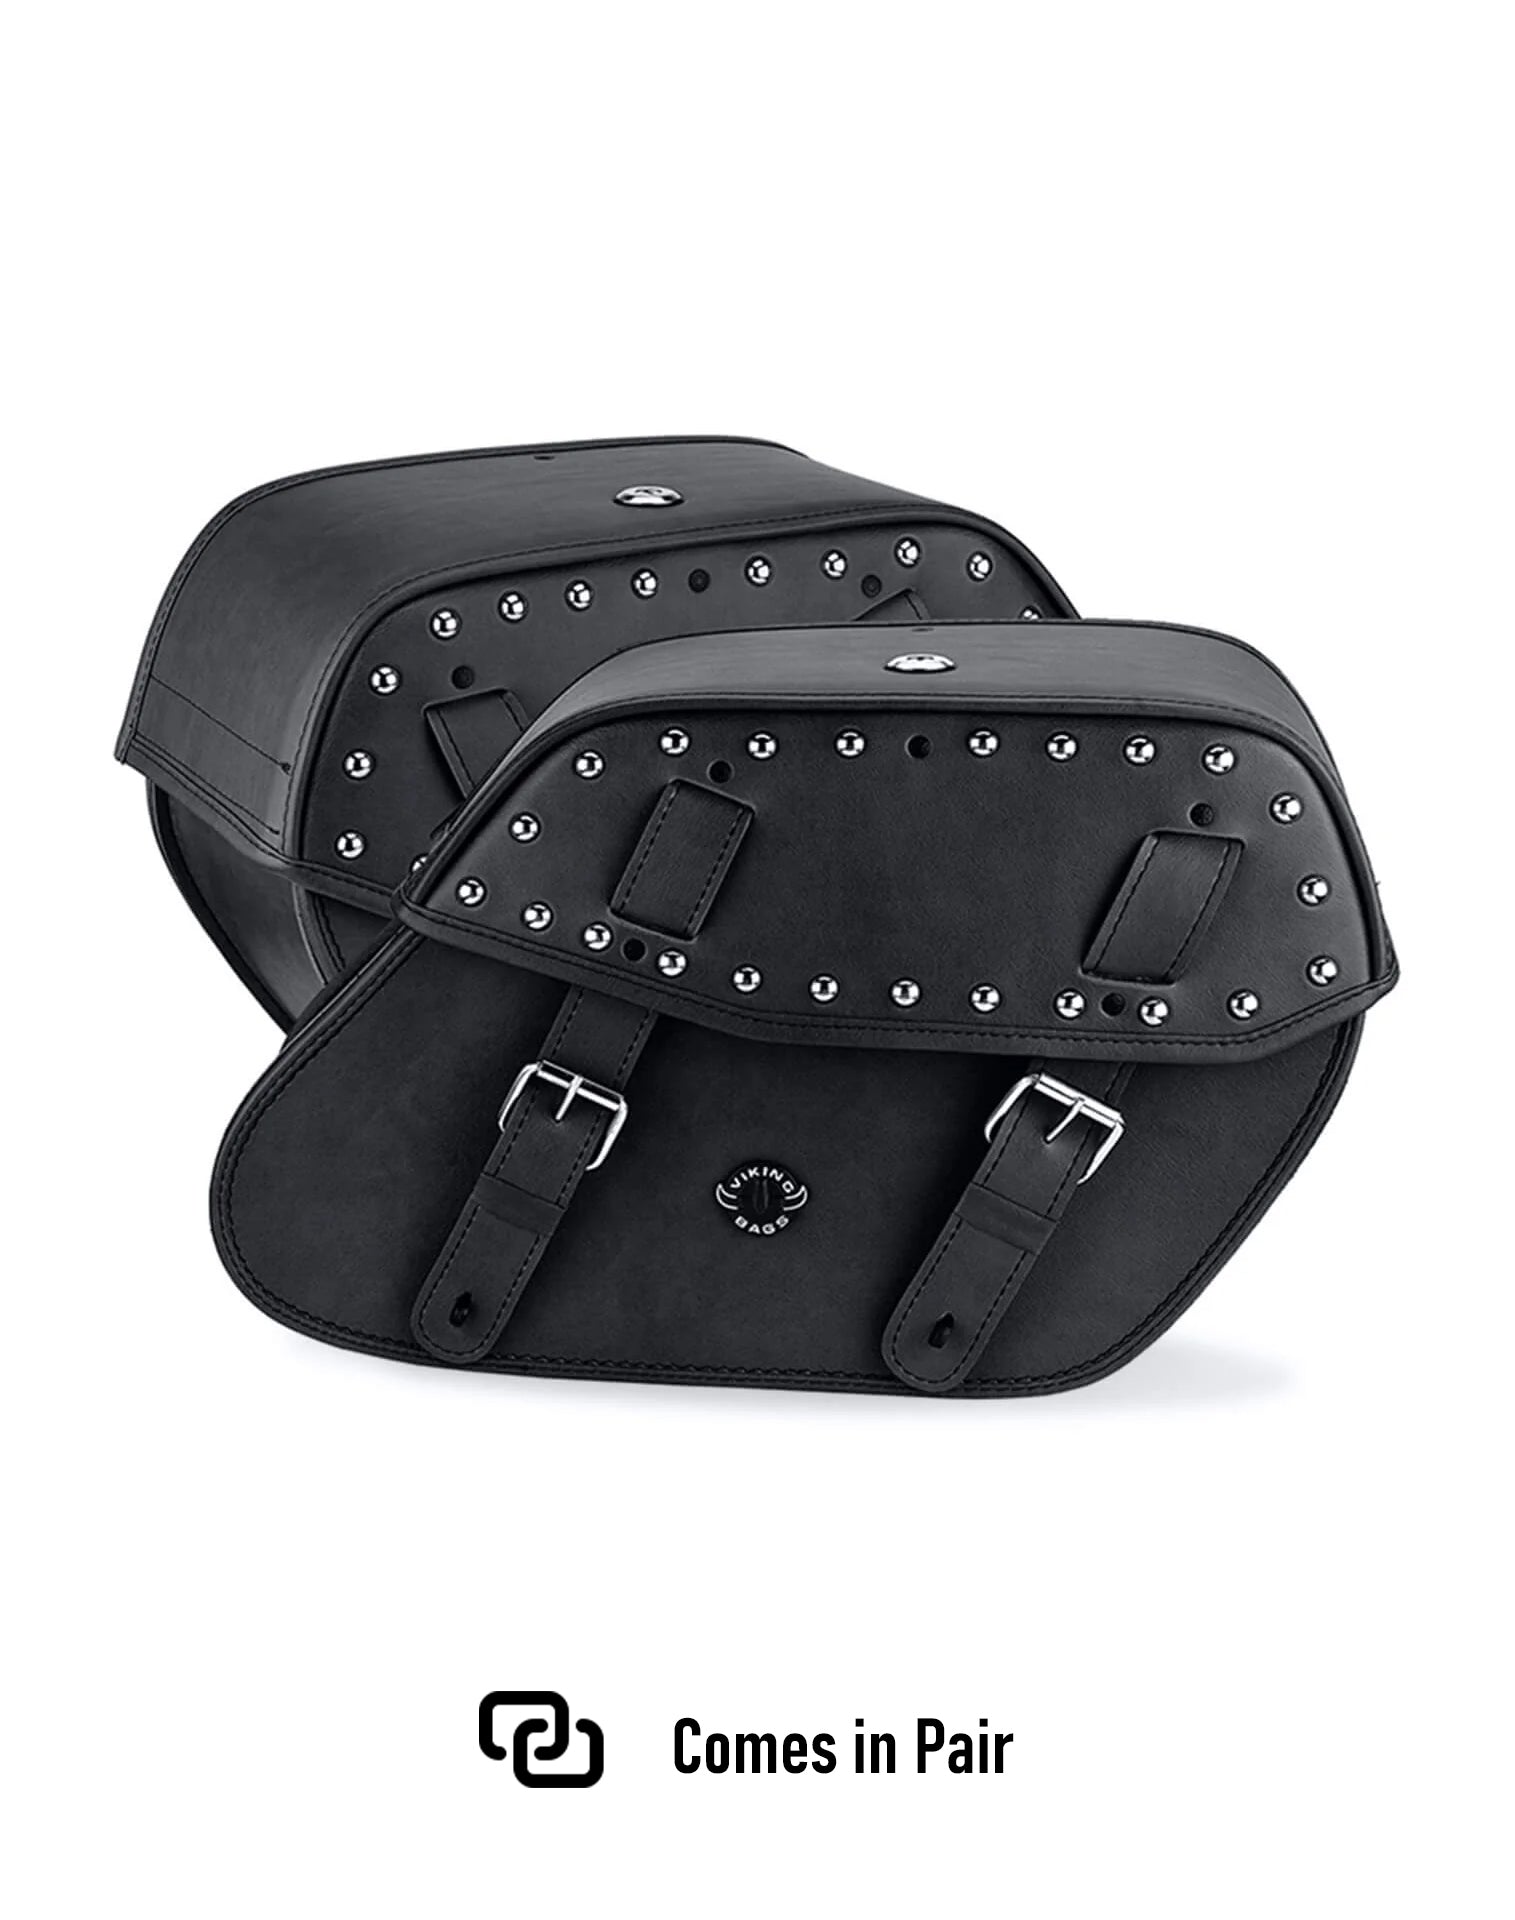 Viking Odin Large Studded Leather Motorcycle Saddlebags For Harley Softail Breakout 114 Fxbr S Weather Resistant Bags Comes in Pair